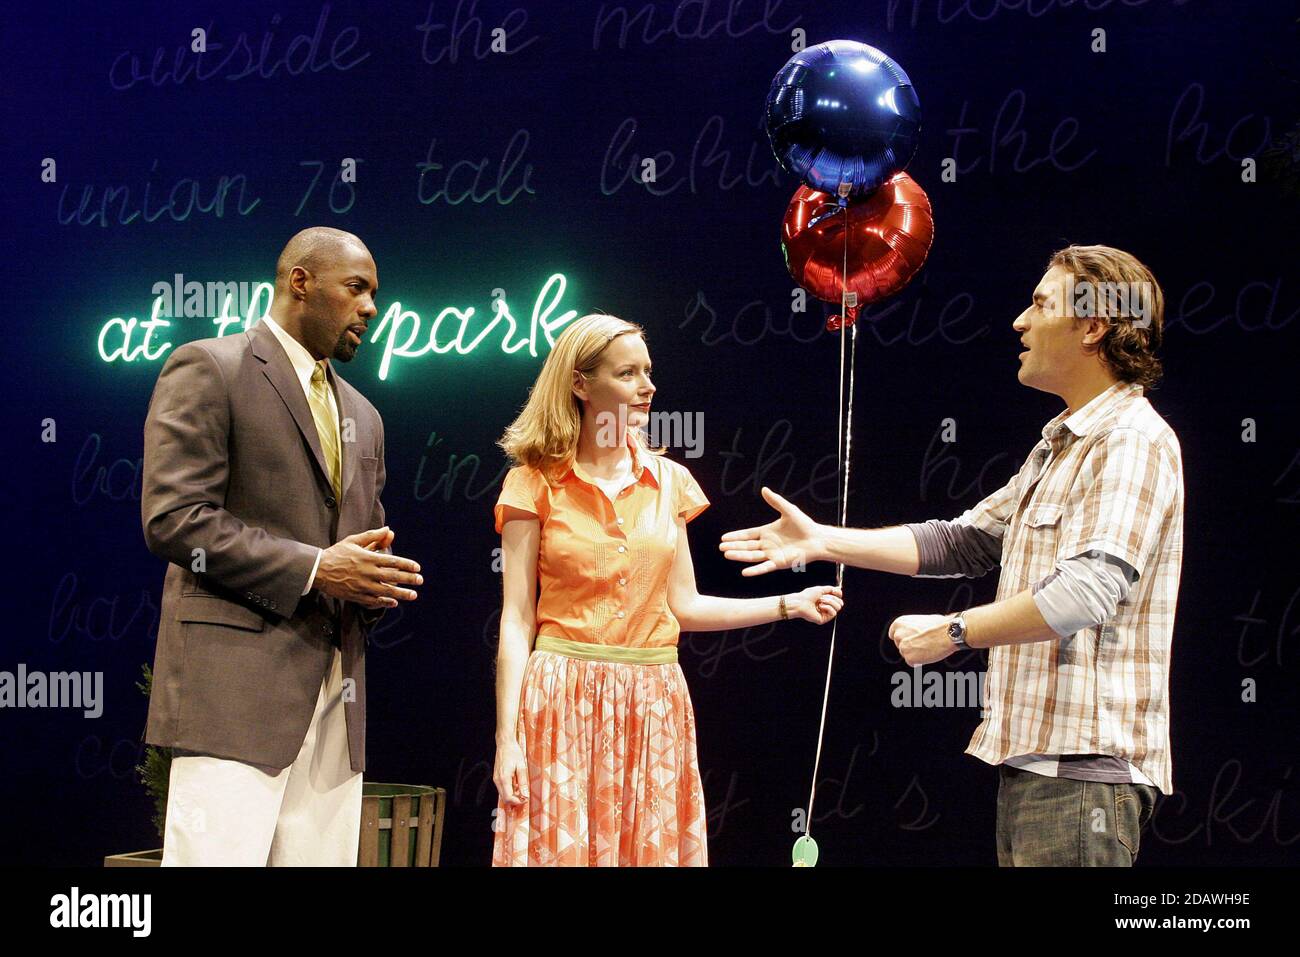 l-r: Idris Elba (Cody), Megan Dodds (Woman), Ben Chaplin (Man) in THIS IS HOW IT GOES by Neil LaBute at the Donmar Warehouse, London WC2  31/05/2005  director: Moises Kaufman Stock Photo